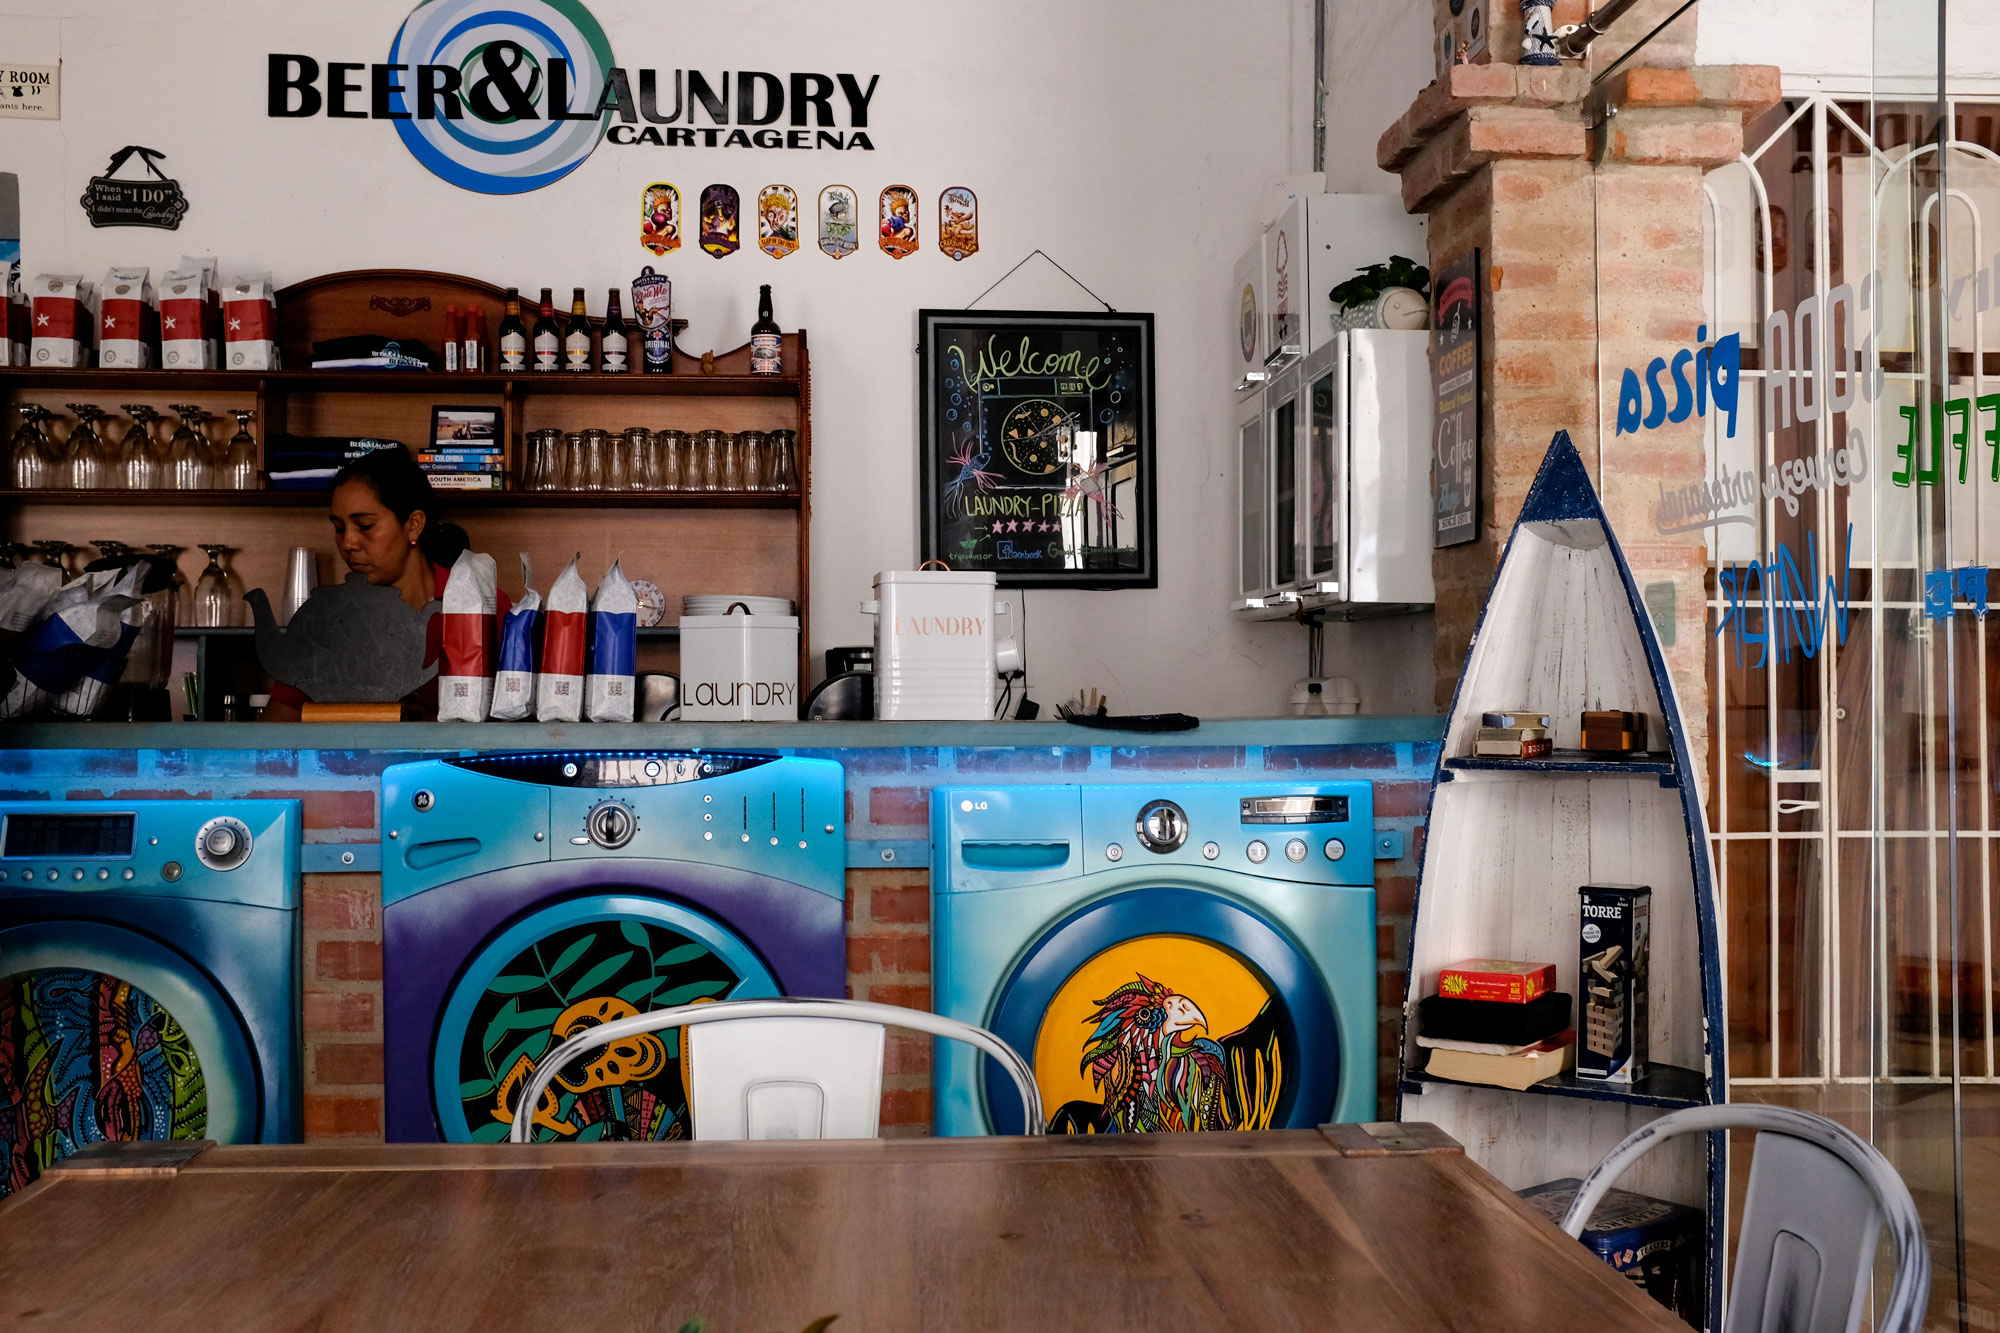 Interior of beer and laundry. The bar is made to look like washing machines!